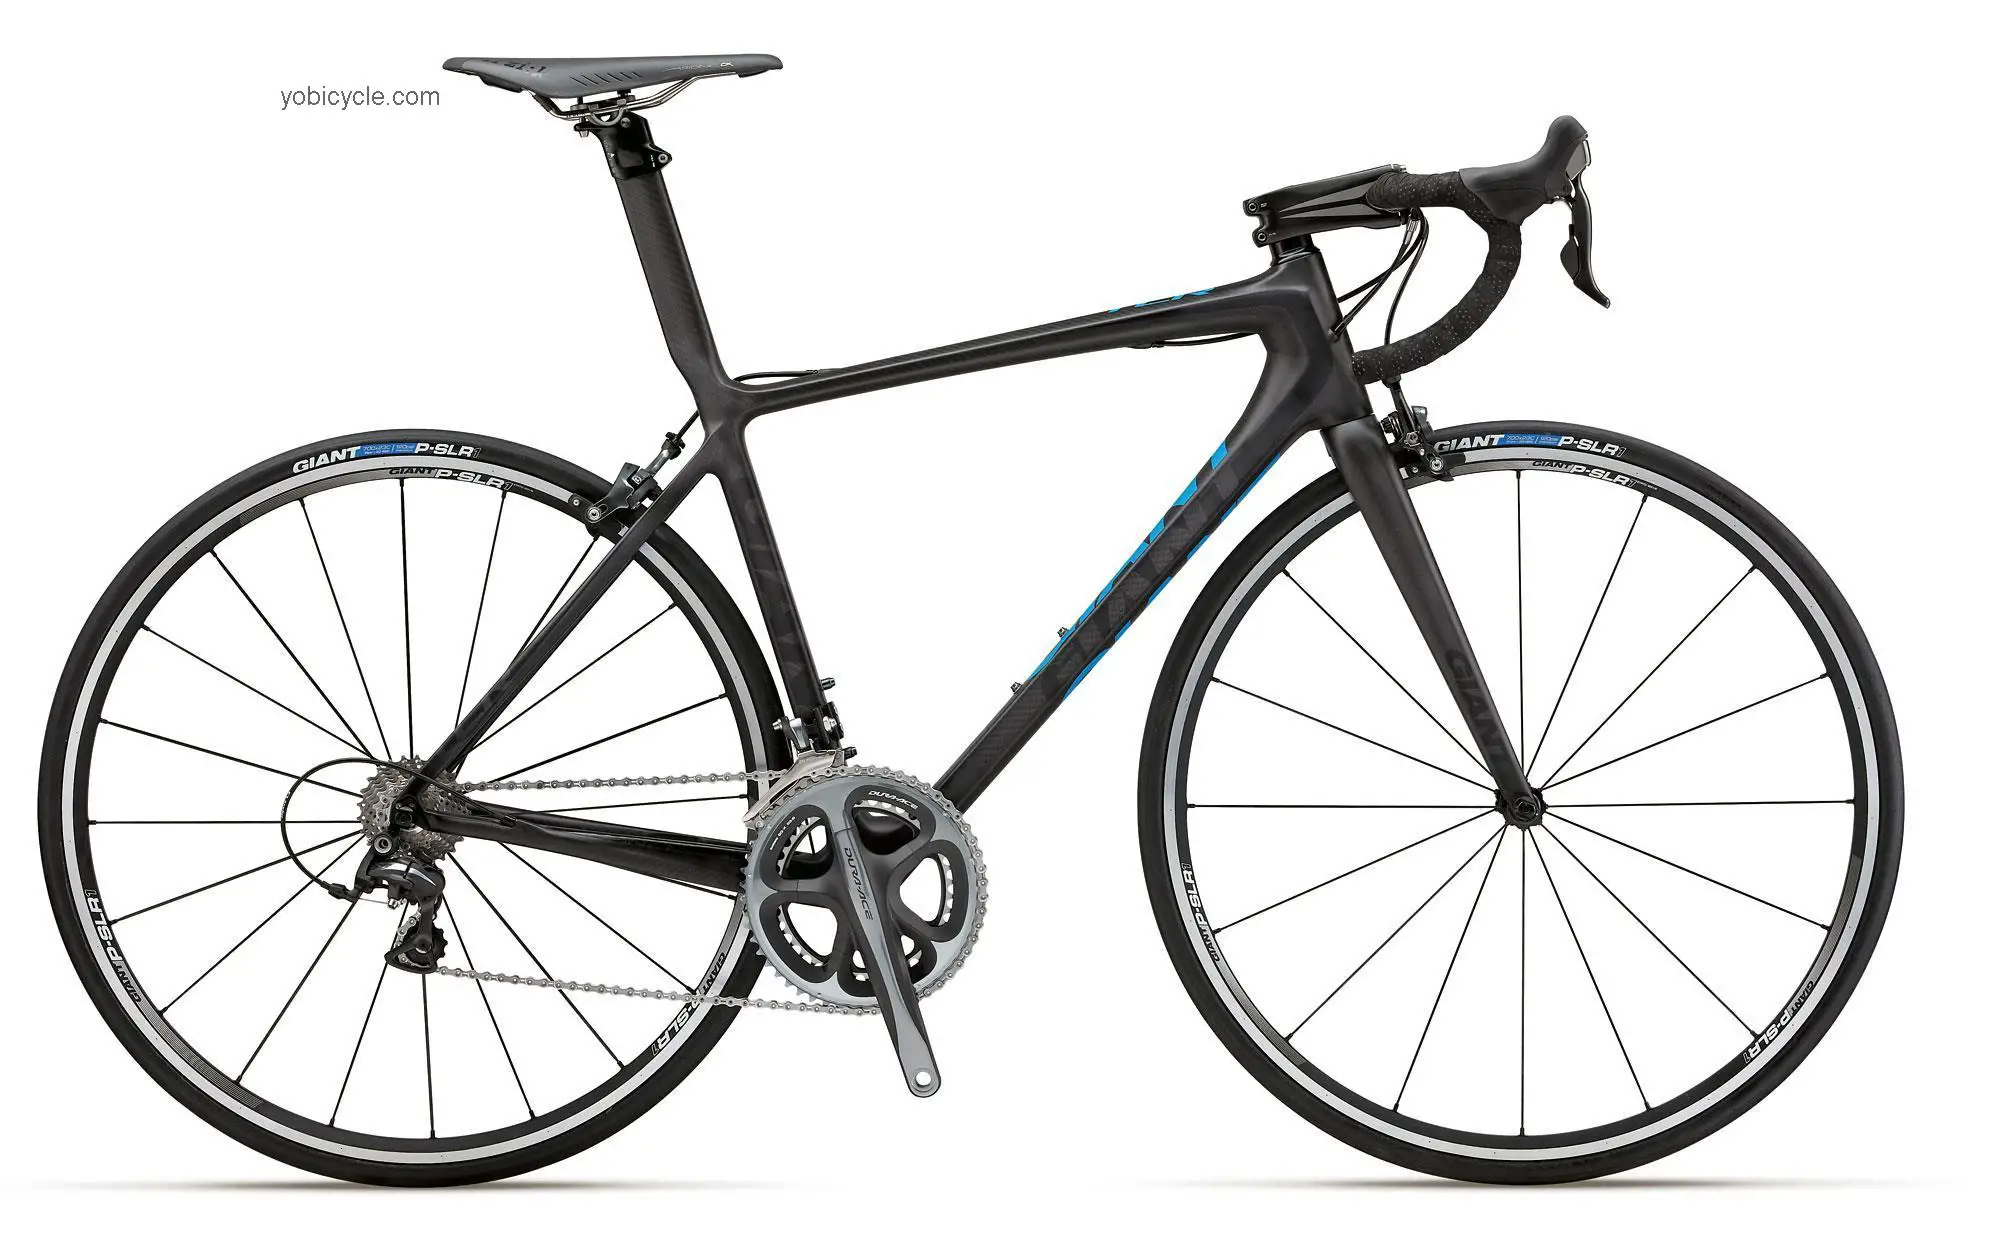 Giant TCR Advanced SL 1 ISP 2012 comparison online with competitors